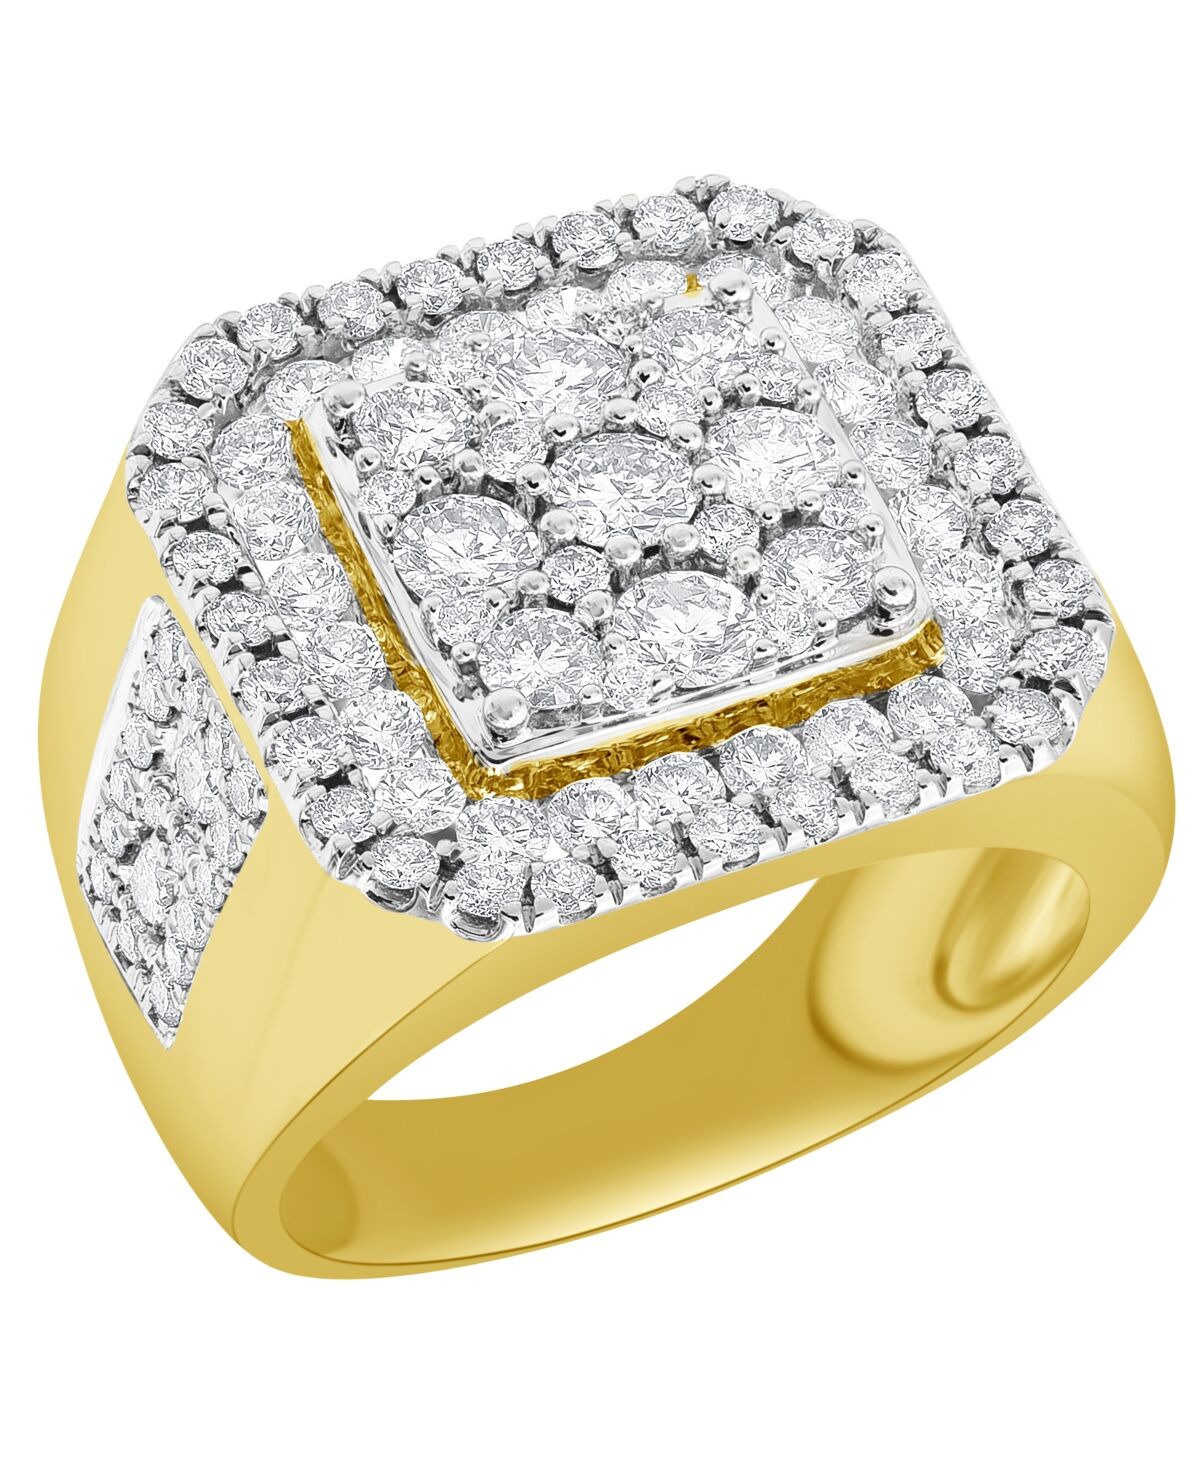 Macy's Men's Diamond Cluster Ring (3 ct. t.w.) in 10k Gold and White Gold - Yellow Gold